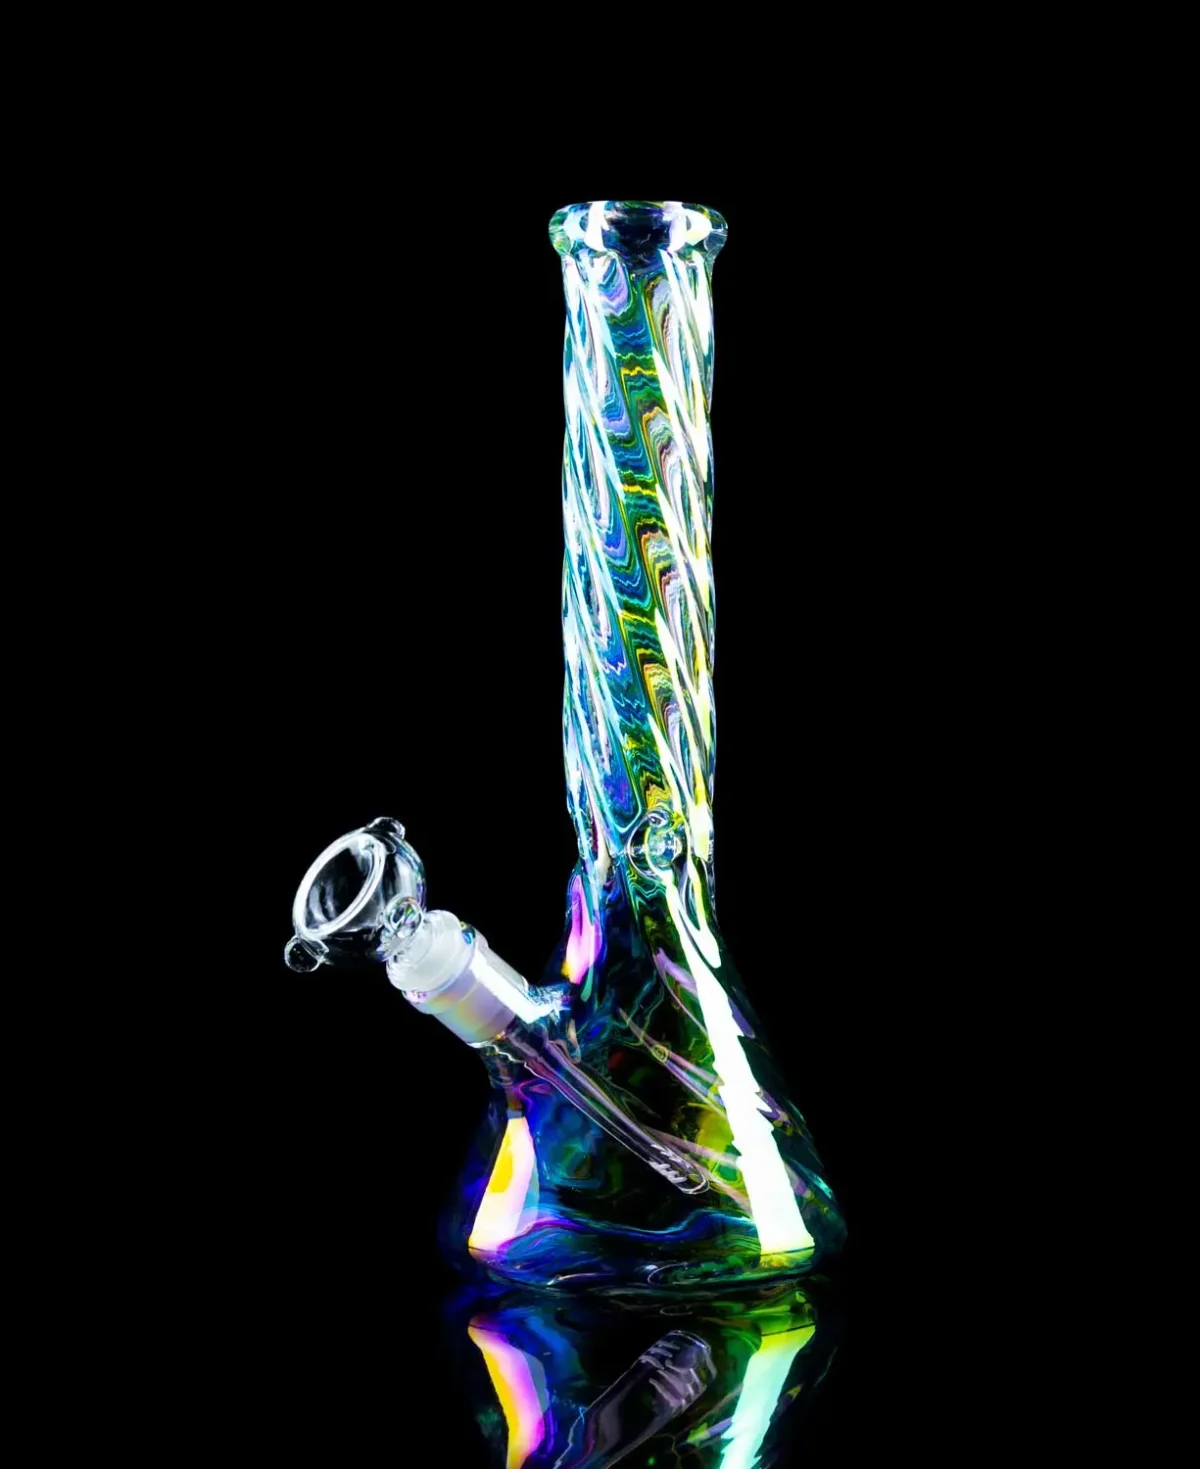 swirl bong with iridescent finish on black table